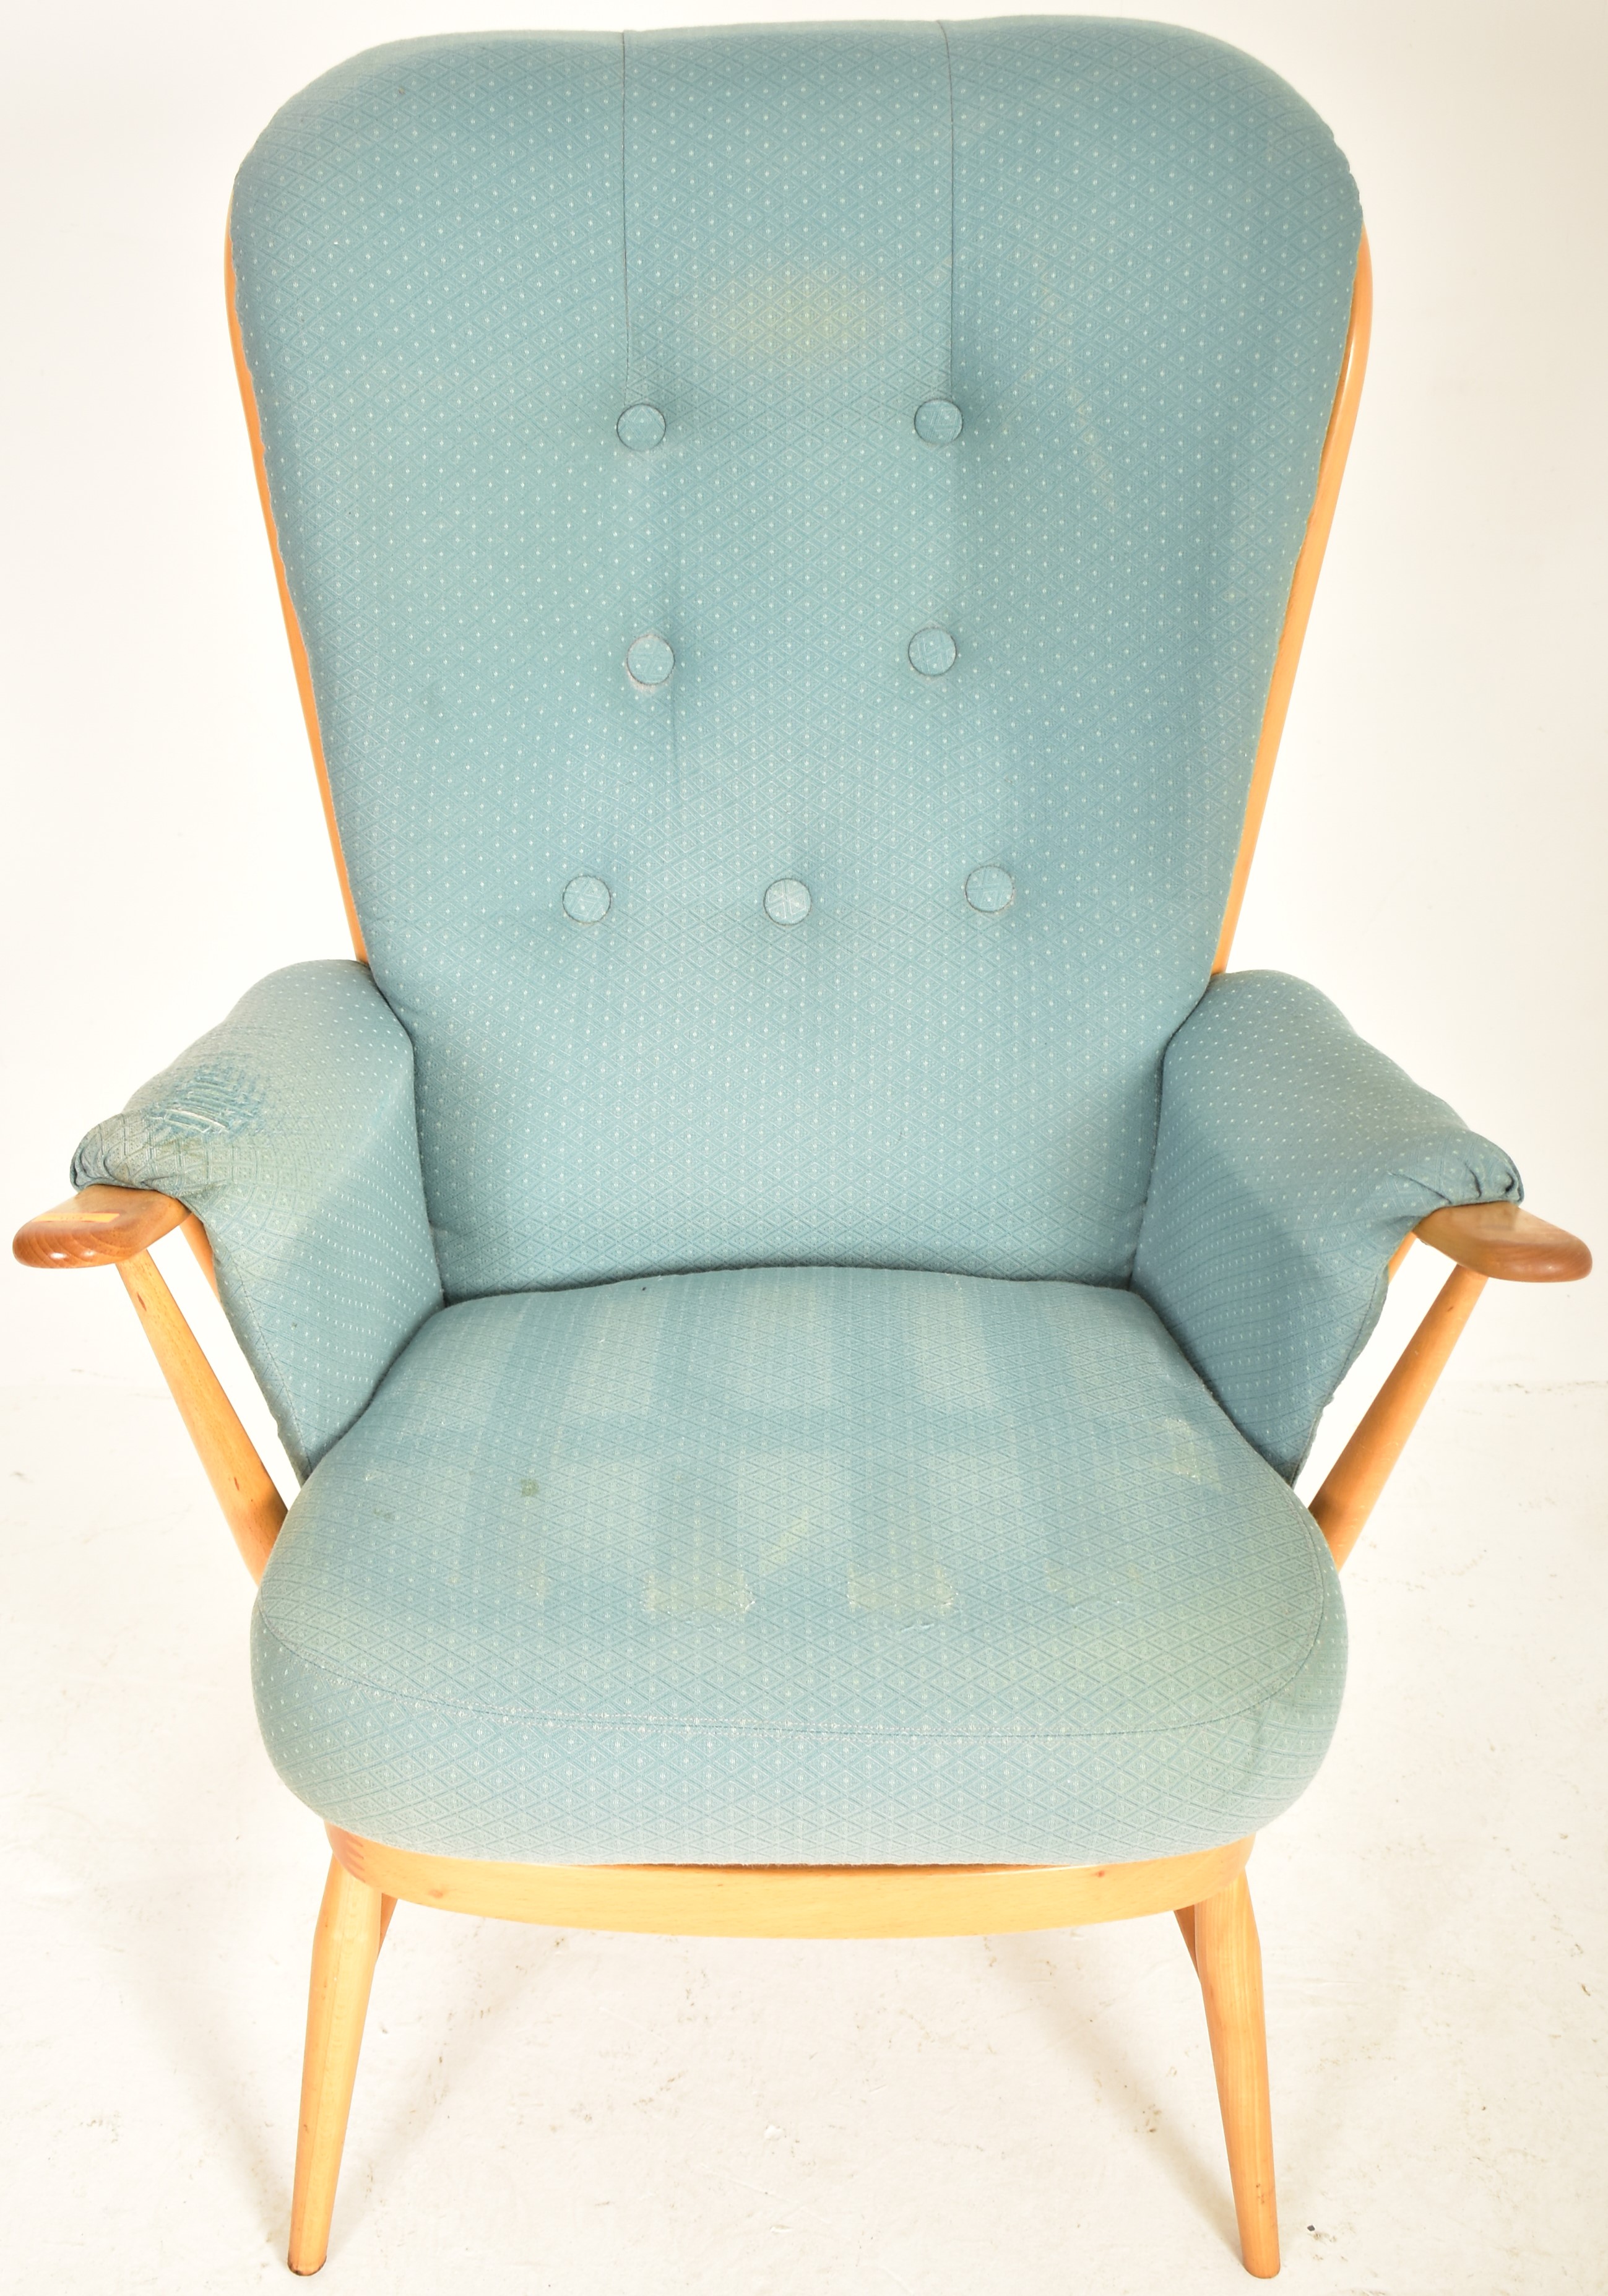 ERCOL - WINDSOR MODEL - MID CENTURY HIGH BACK ARMCHAIR - Image 2 of 5